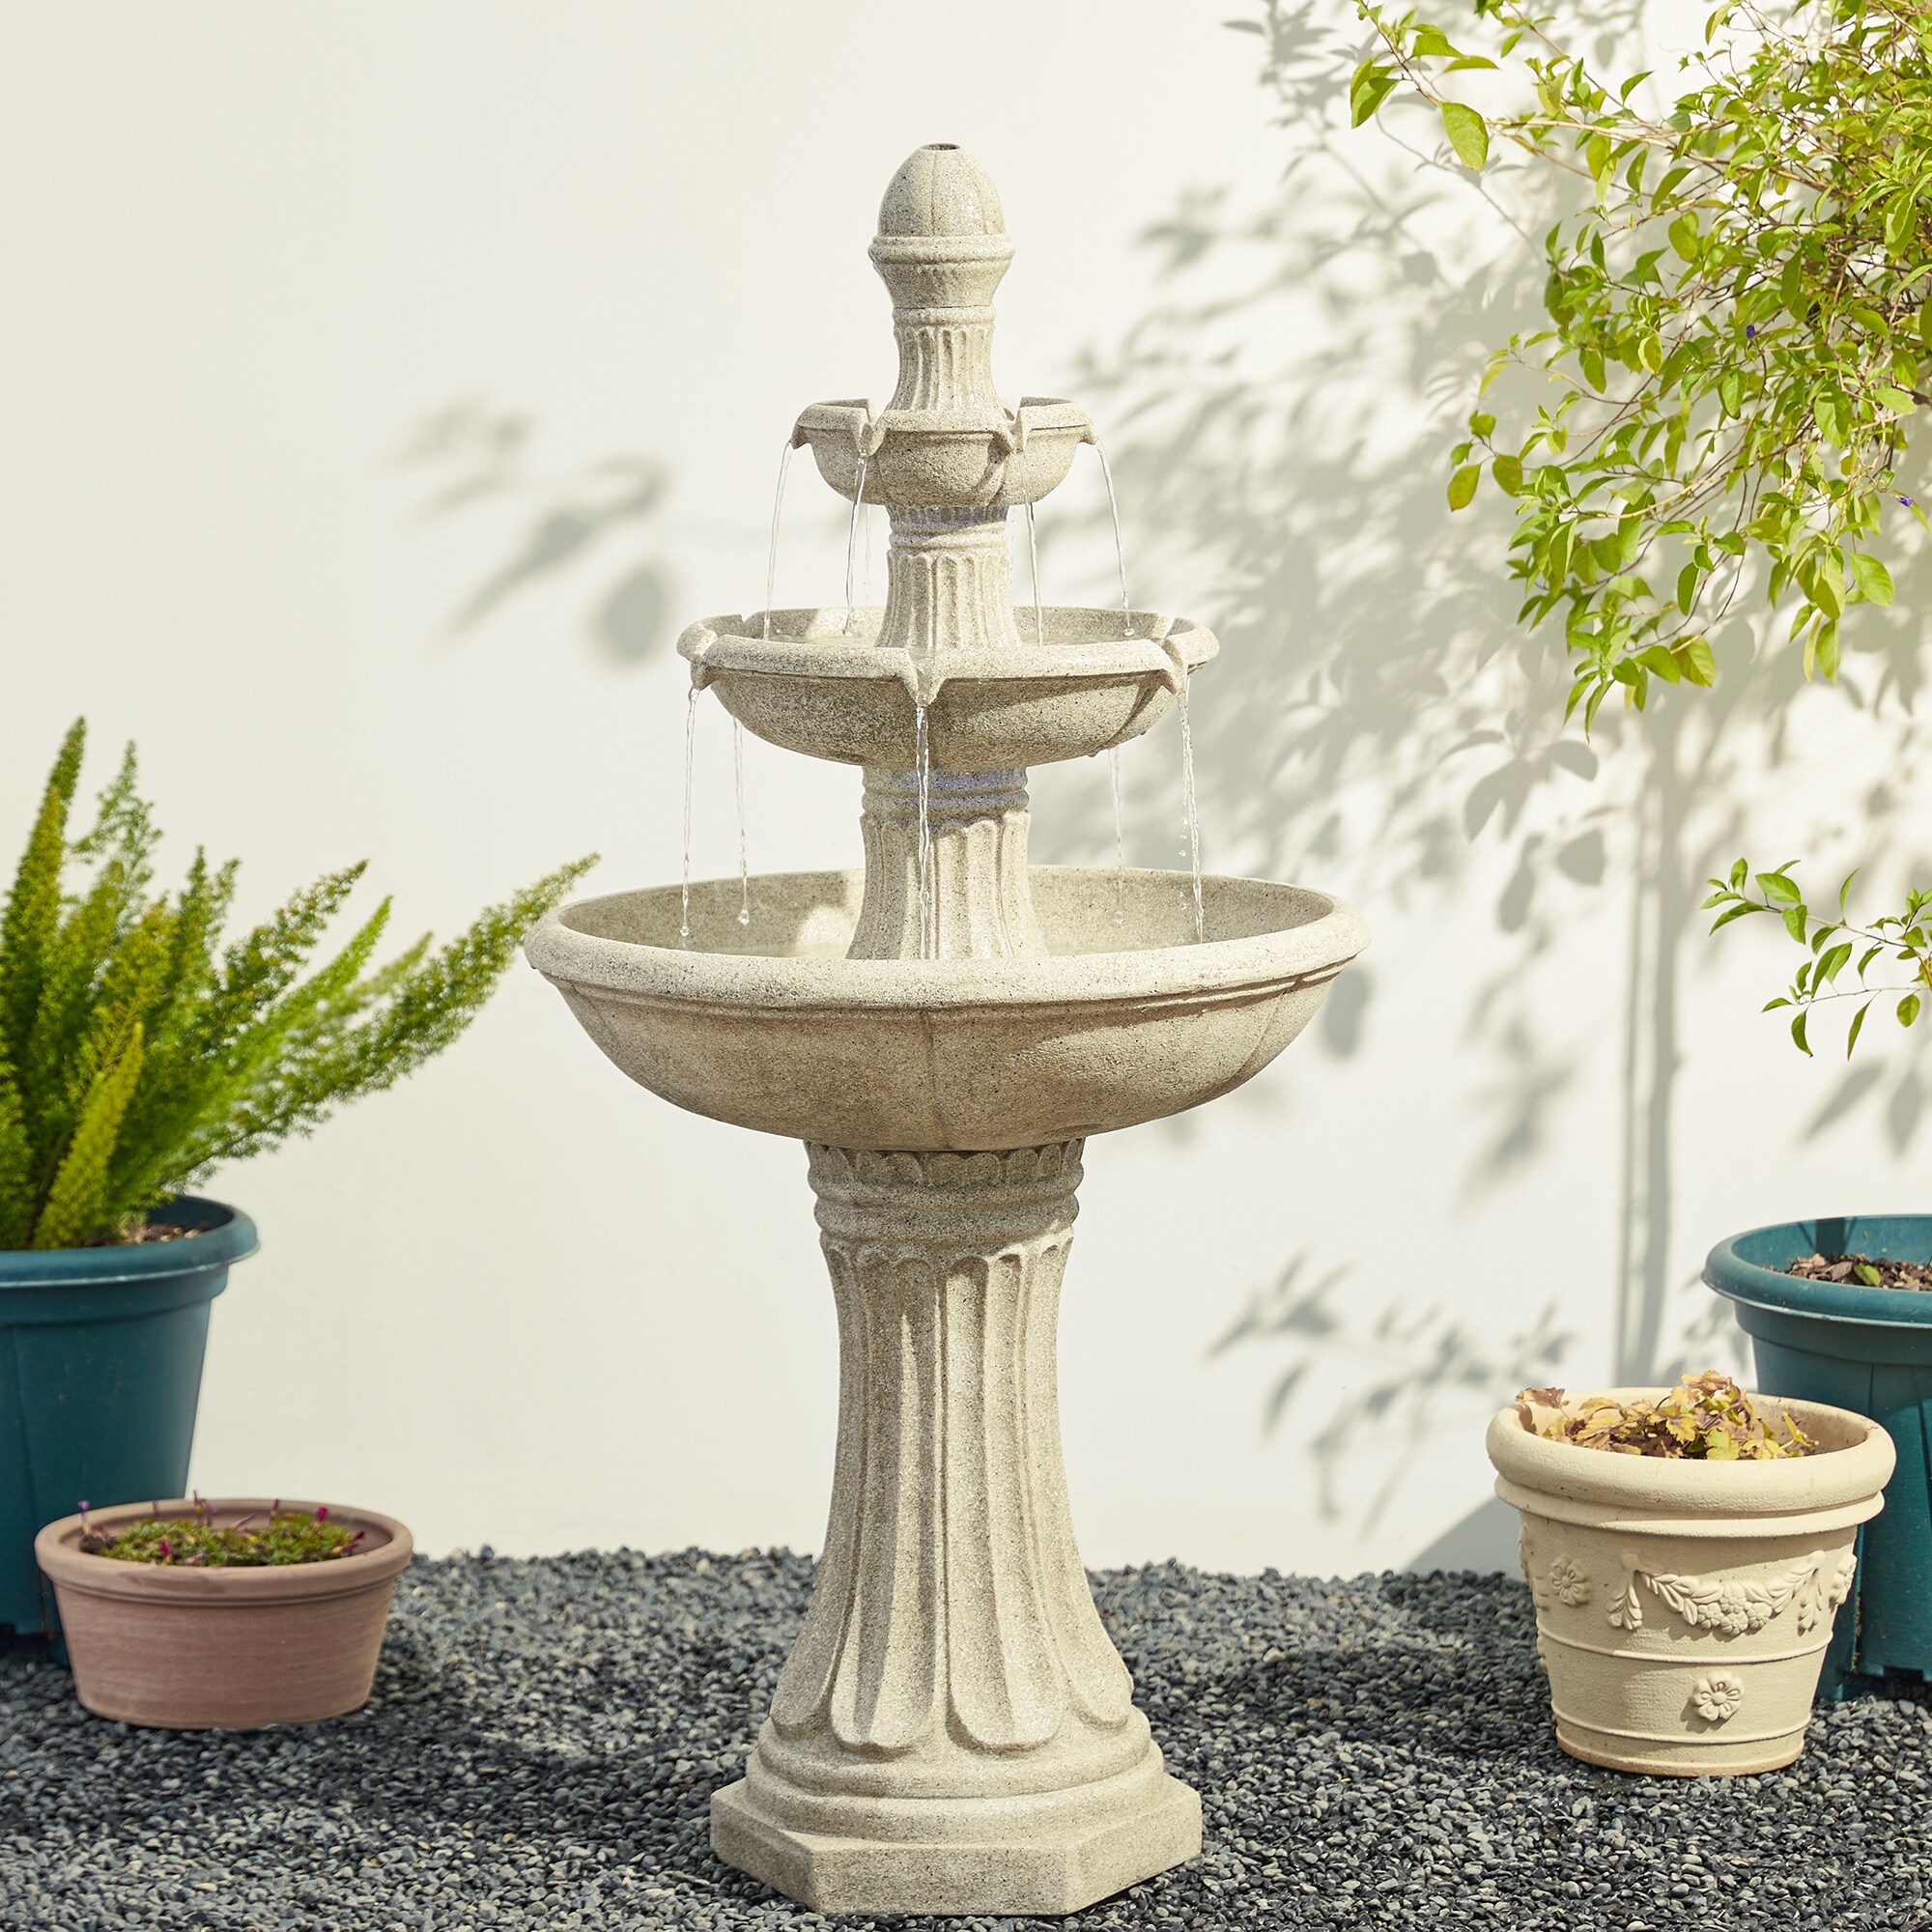 Glitzhome 45.25-in H Resin Outdoor Fountain Statue Pump Included in the ...